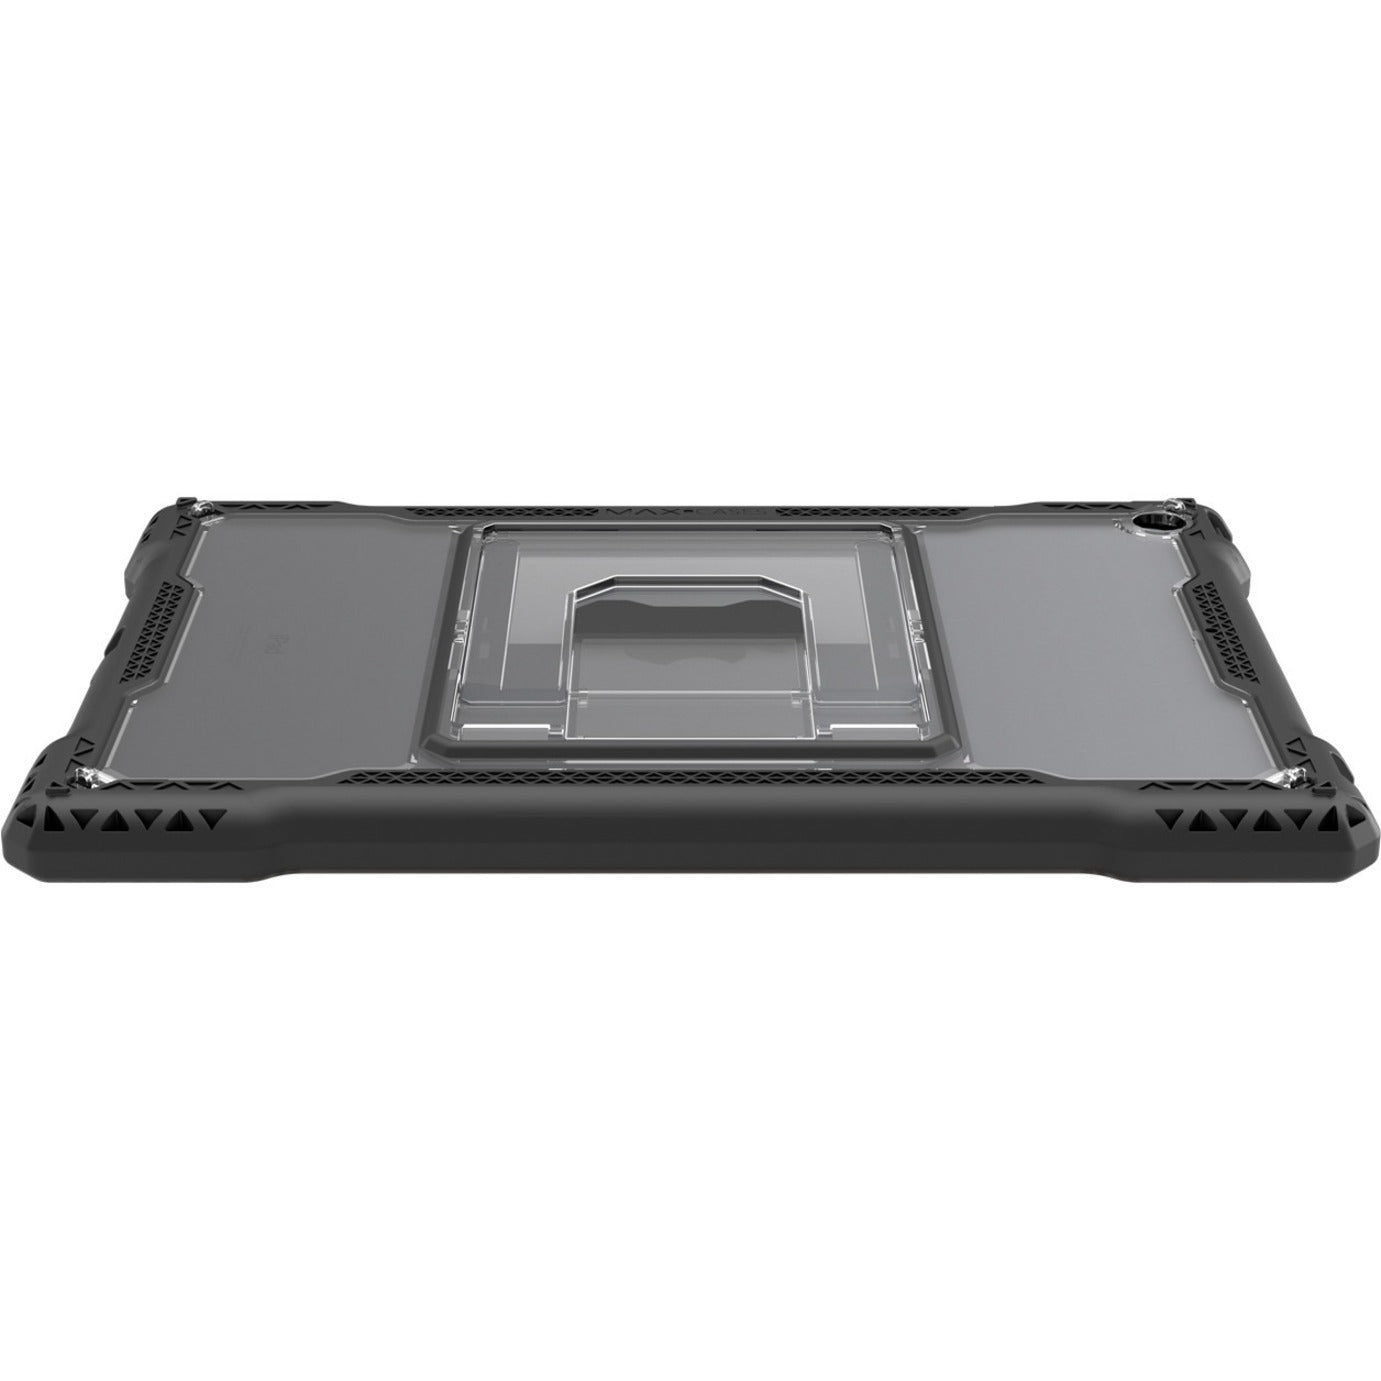 MAXCases AP-SXX-IP9-M-BLK Shield Extreme-X for iPad 9 10.2 (Black), Rugged Case with Lifetime Warranty